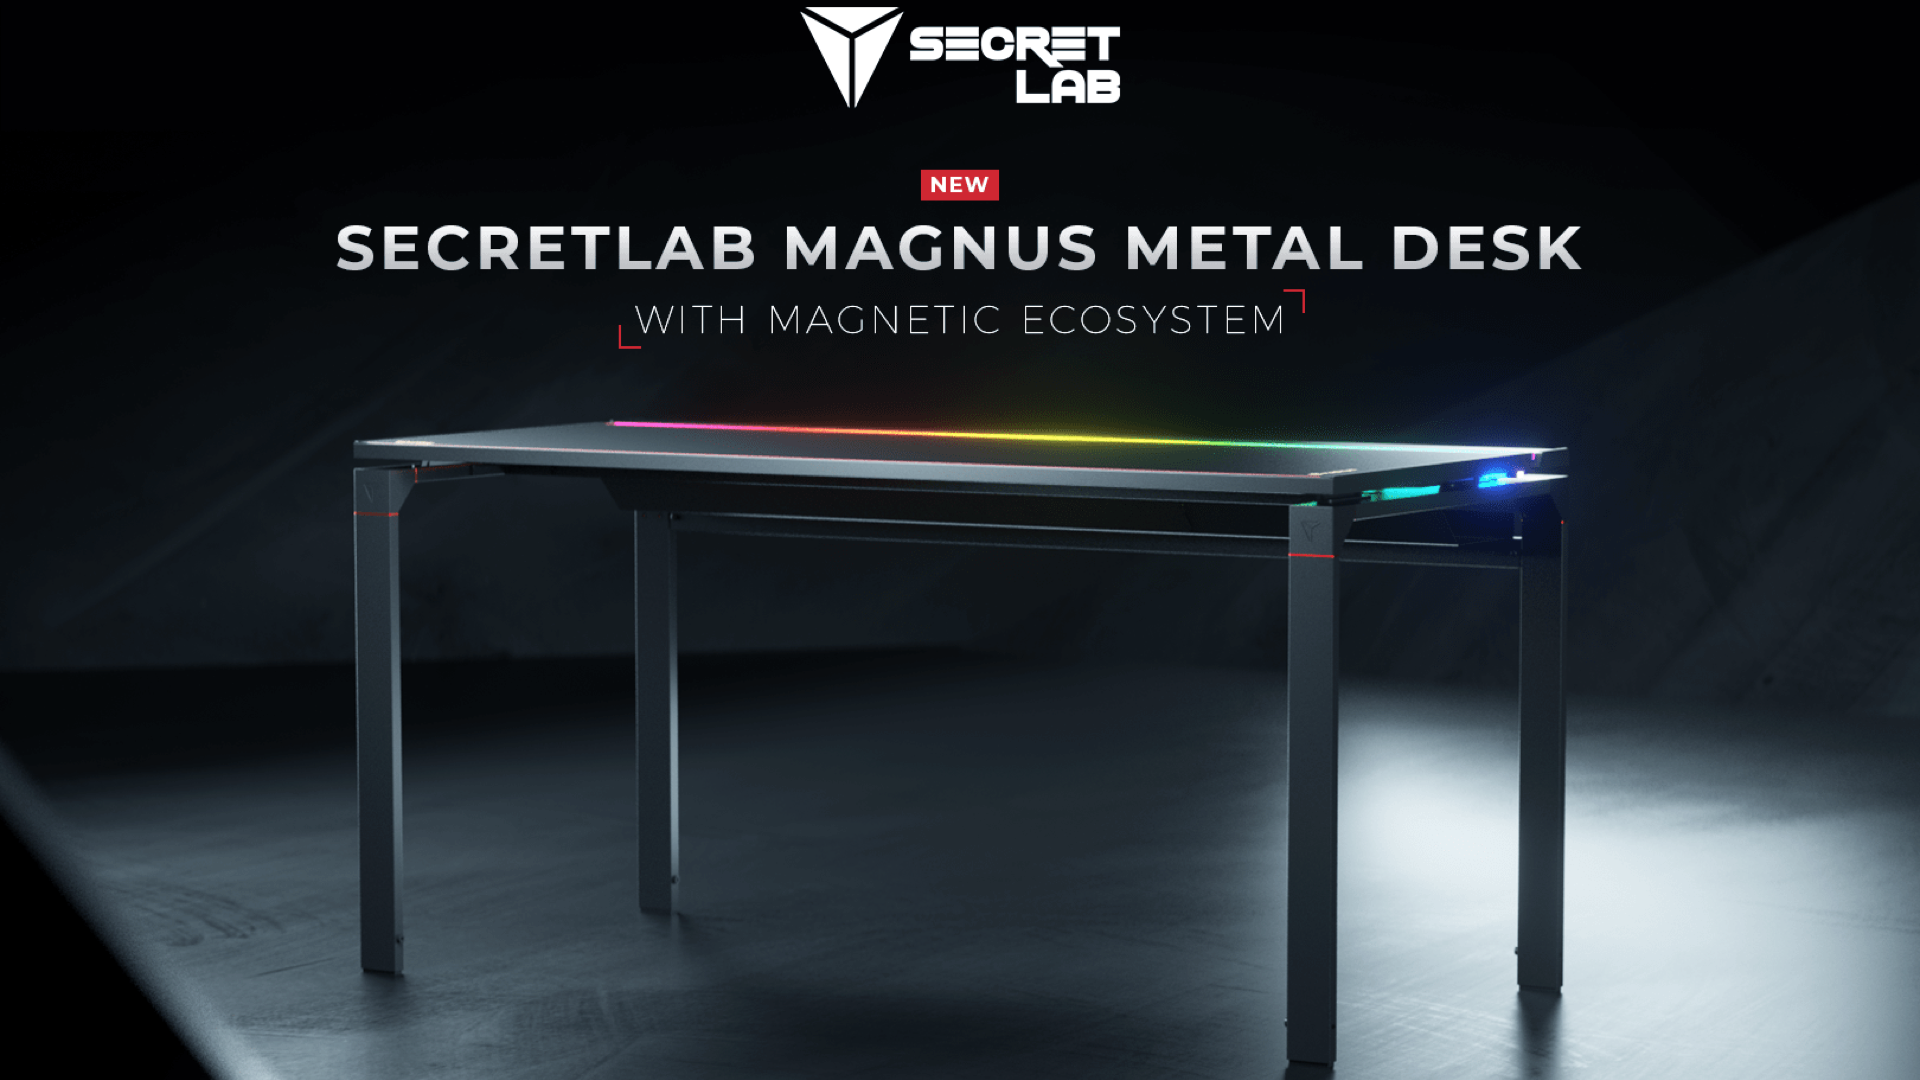 Secretlab’s First Desk Provides Magical Magnetic Accessories and RGB Lights